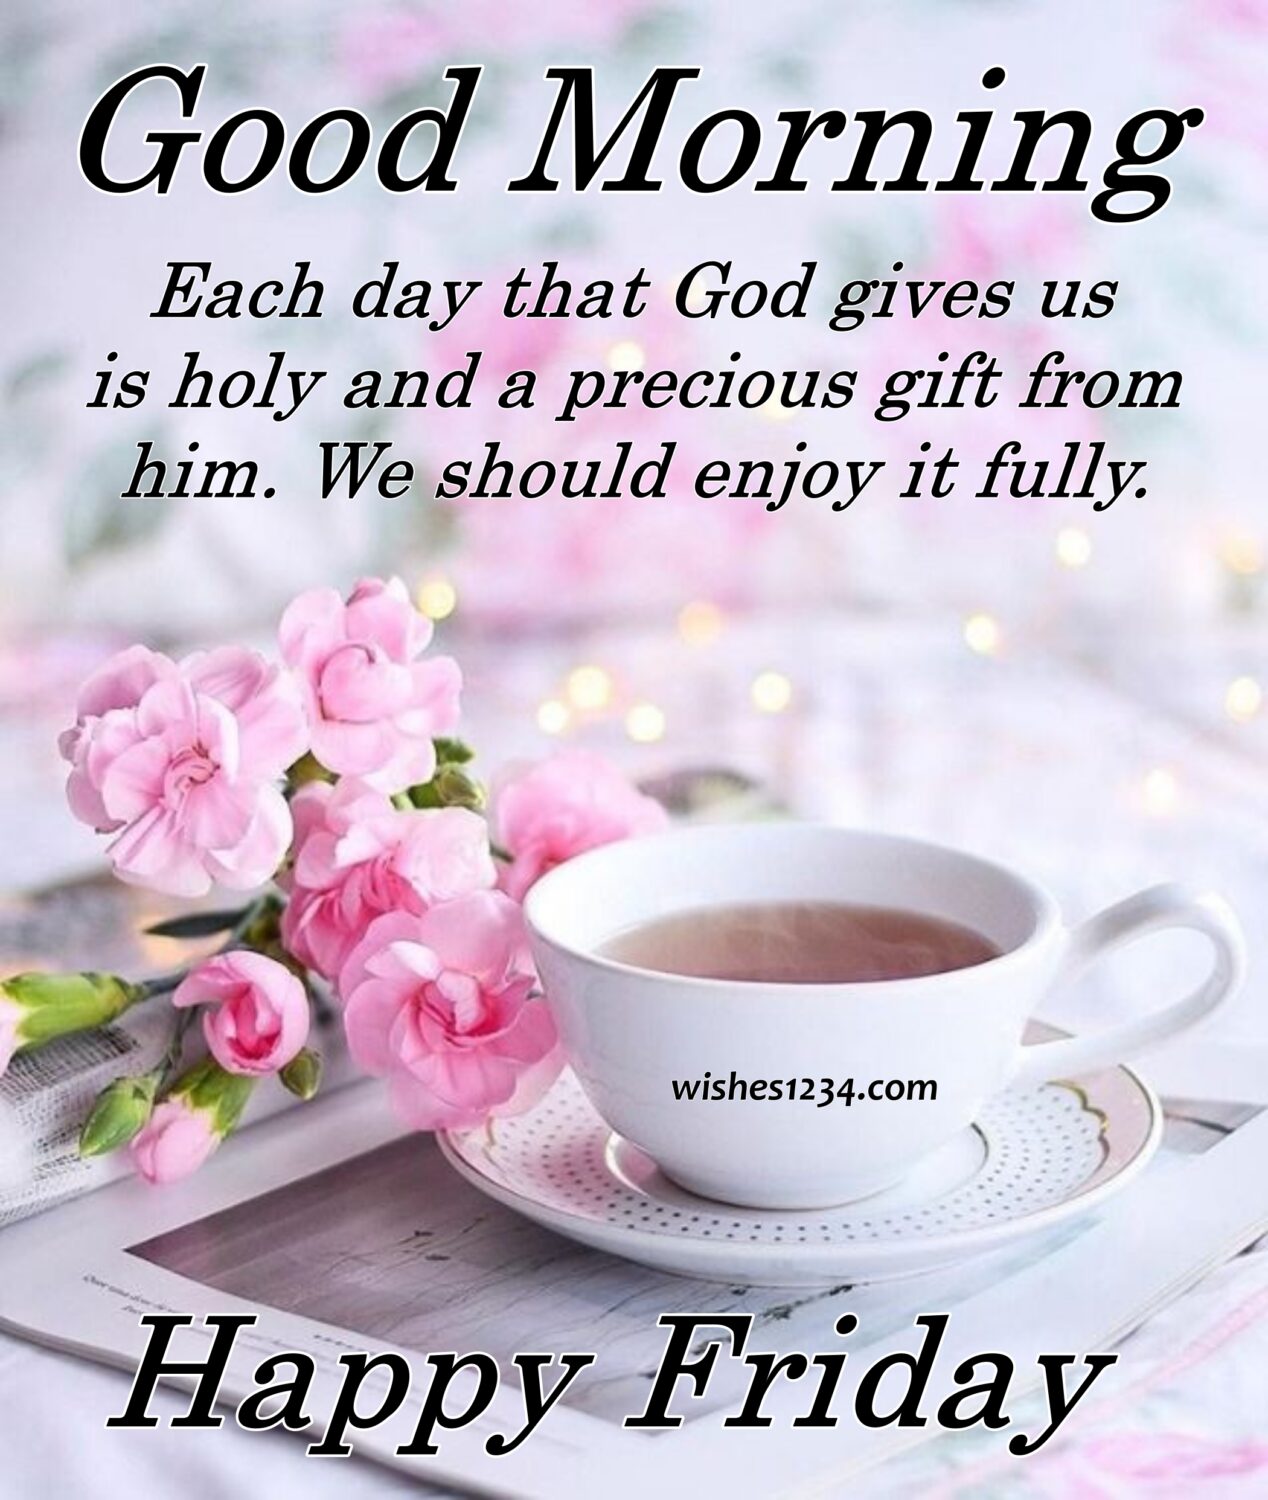 Tea cup saucer with pink flowers, Friday Quotes | Good Morning Friday | Happy Friday | Blessed Friday Quotes.